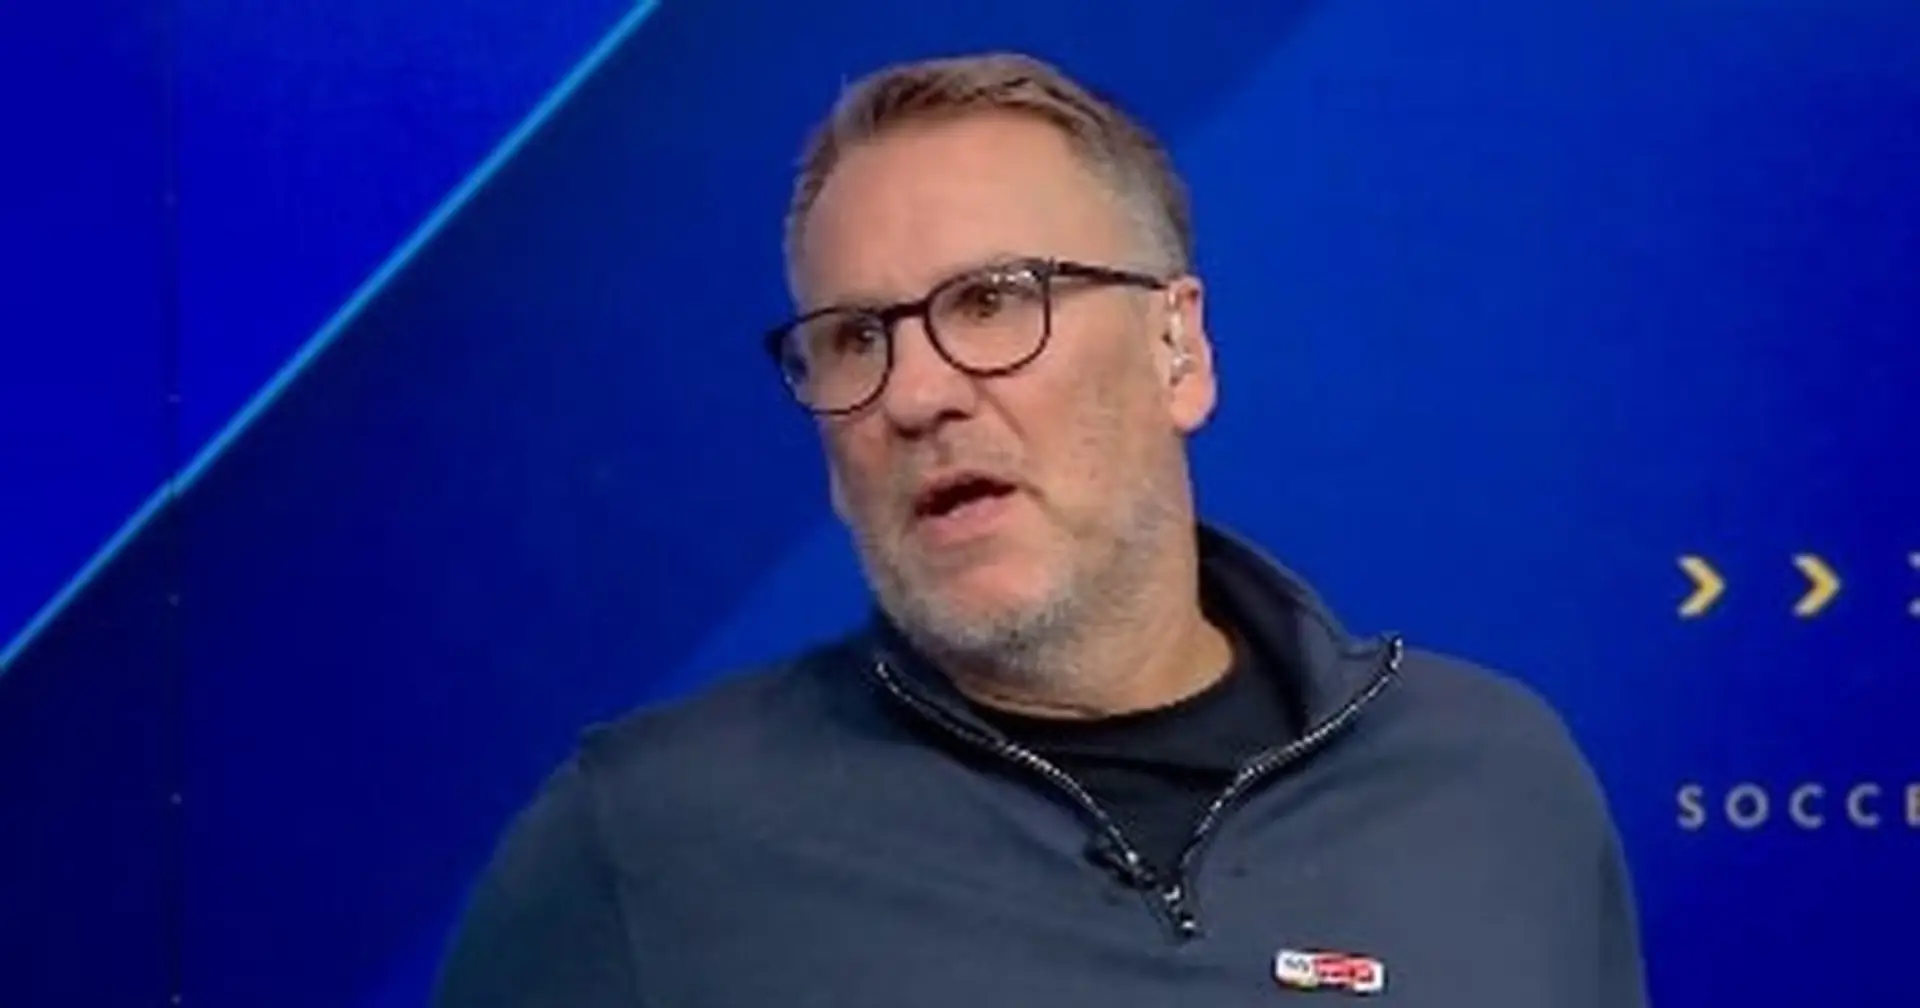 Paul Merson picks out 4 'outstanding' Man United players against Chelsea